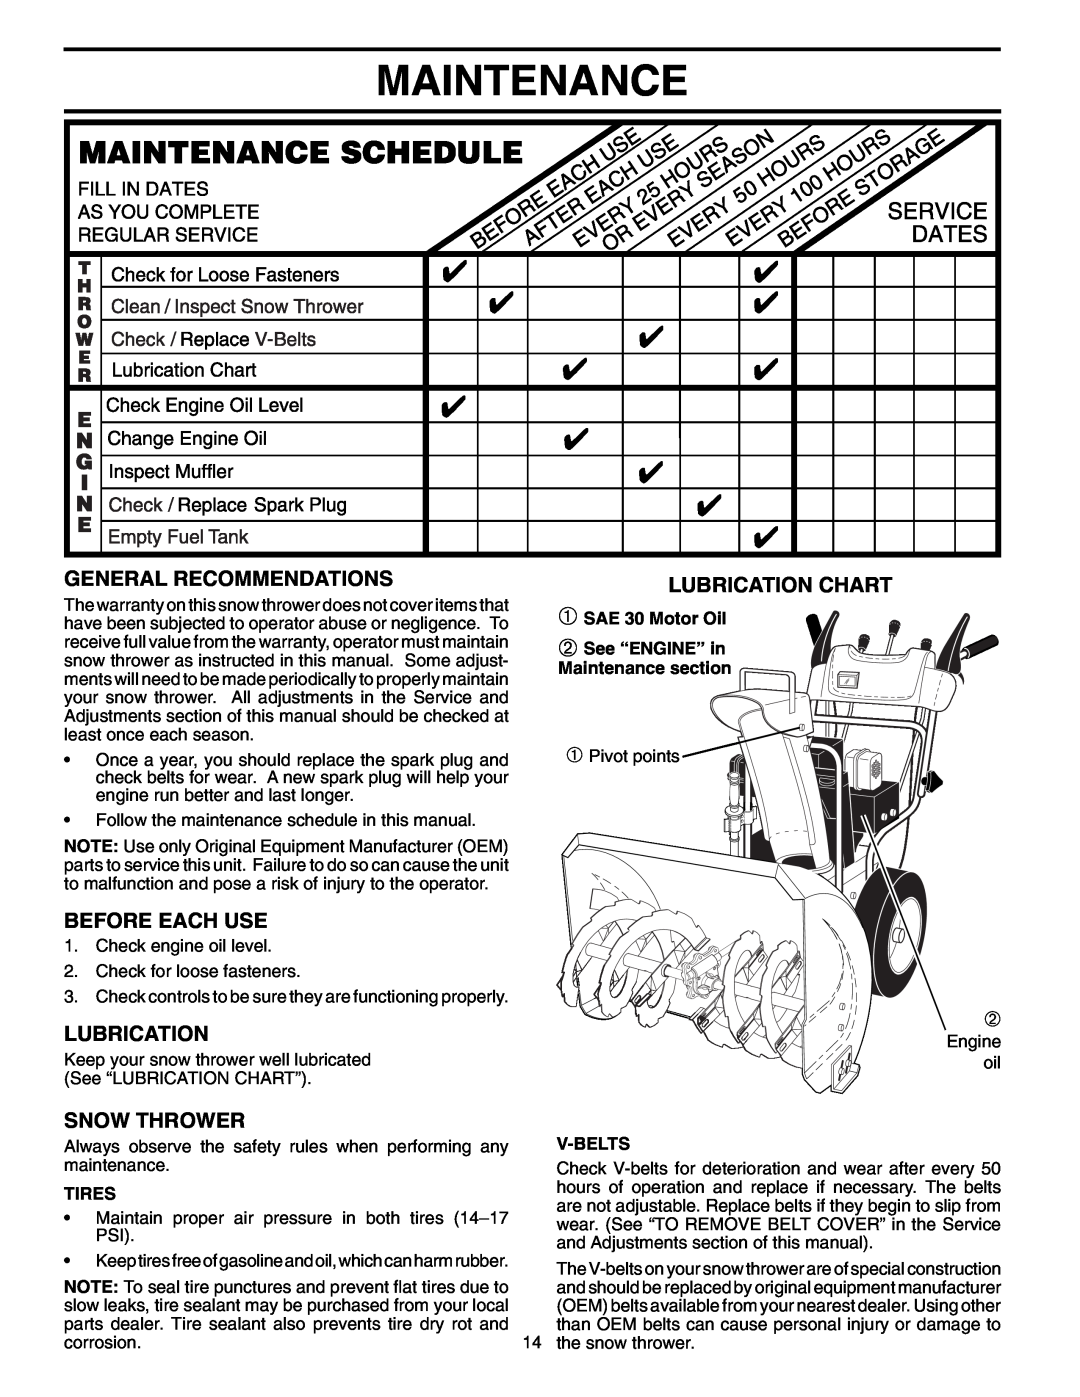 Poulan 199600 owner manual Maintenance, General Recommendations, Before Each Use, Lubrication Chart, Snow Thrower 